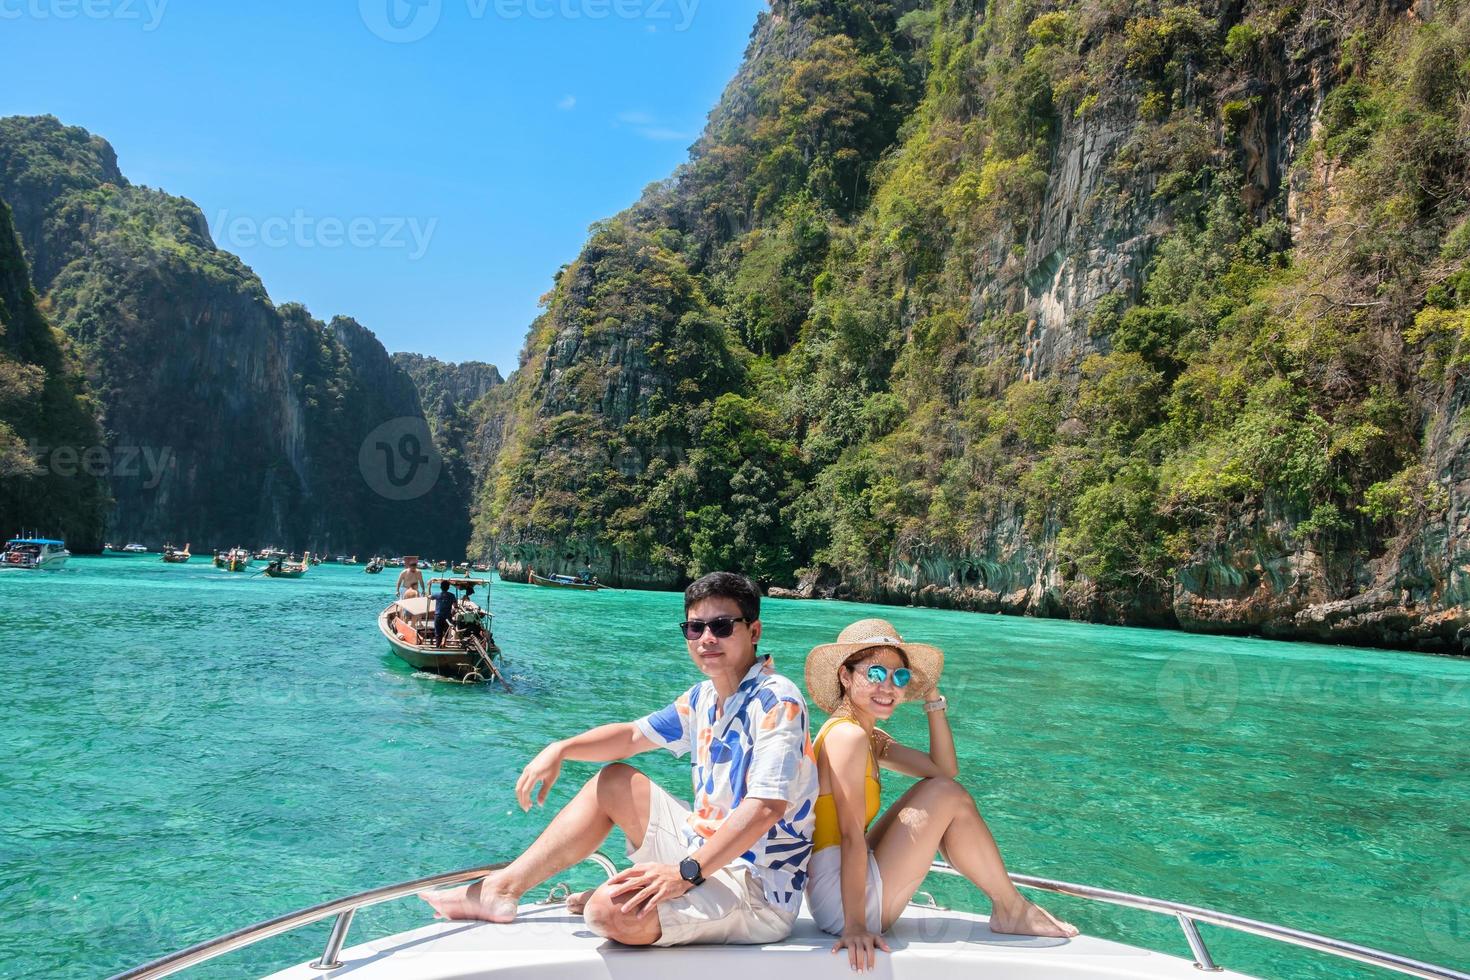 Couple tourist on boat trip, happy traveller relaxing at Pileh lagoon on Phi Phi island, Krabi, Thailand. Exotic, honeymoon, love, destination Southeast Asia Travel, vacation and holiday concept photo